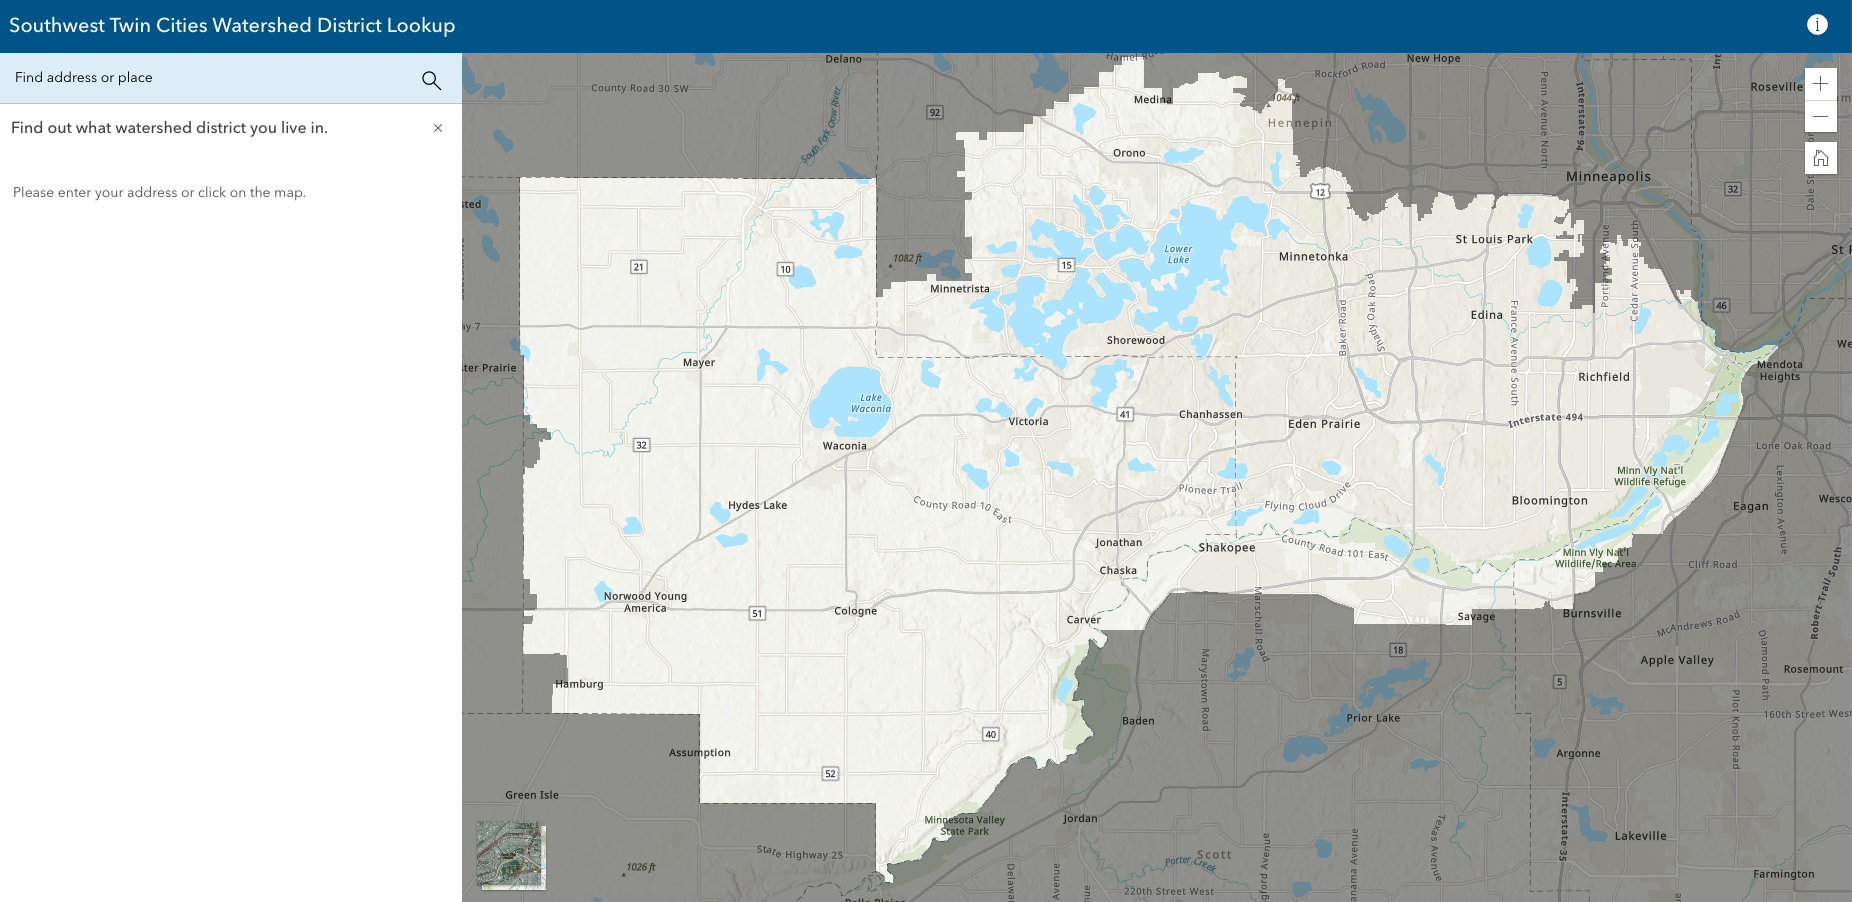 Southwest Twin Cities Watershed District Lookup